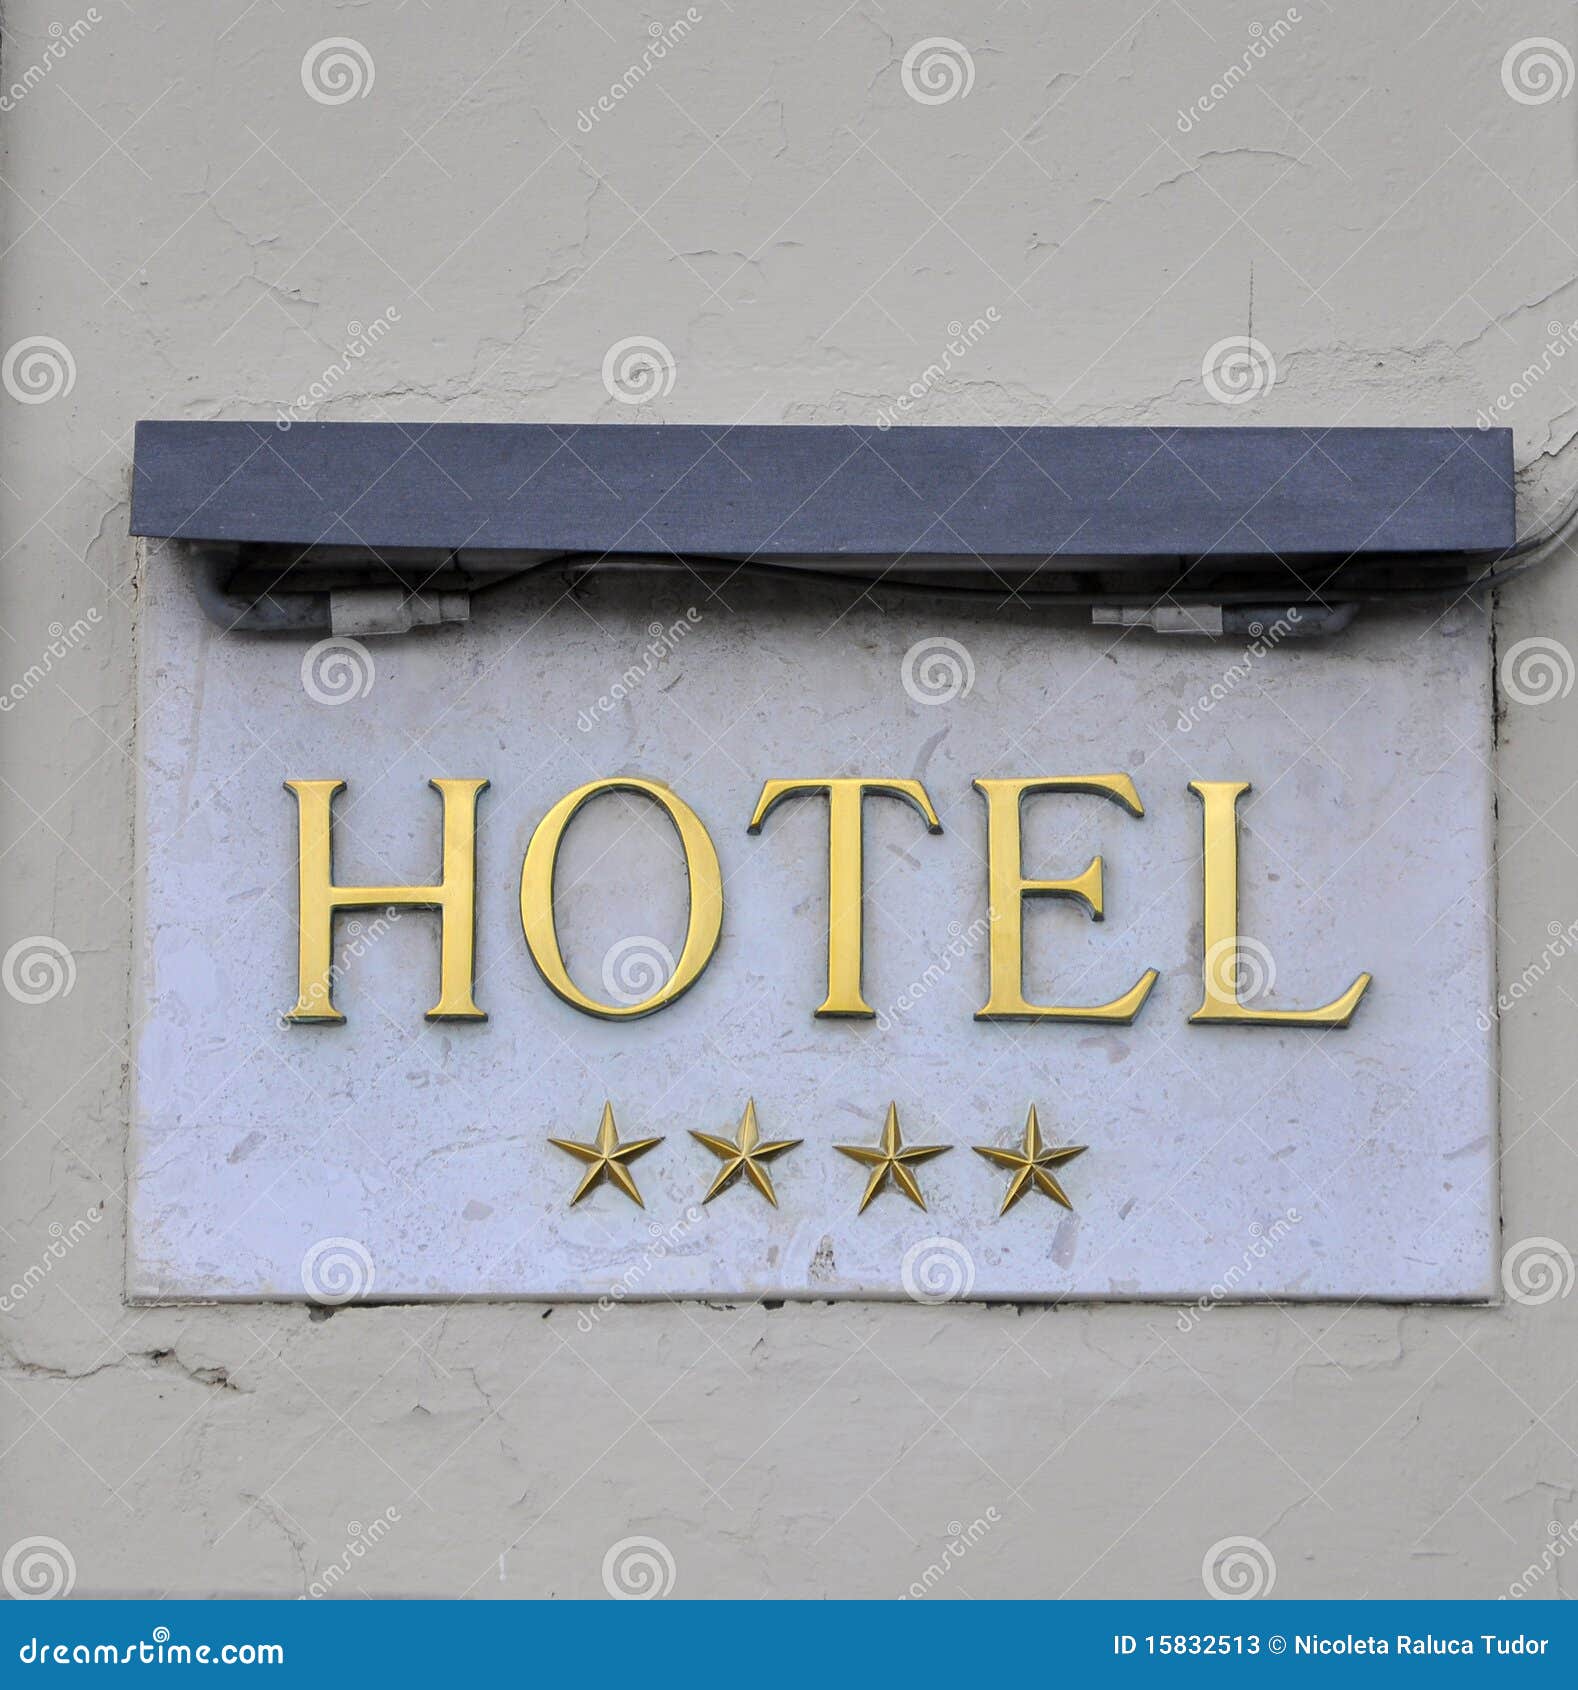 hotel sign: four star hotel in italy